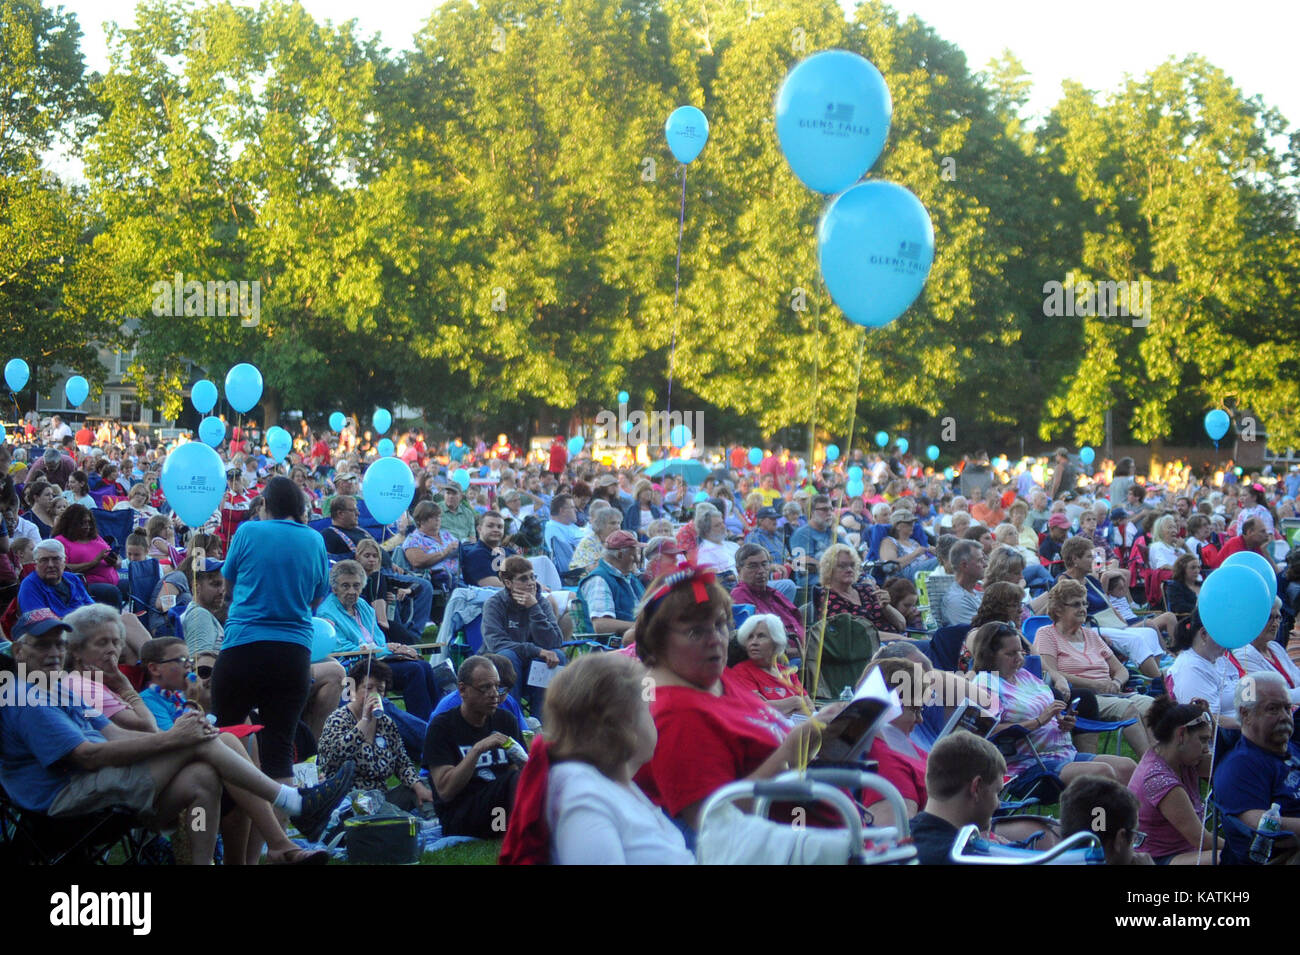 Iowa, USA. 3rd July, 2017. Balloons provided by the Glens Falls Collaborative dotted the packed crowd at the Glens Falls Symphony Orchestra's 15th annual Summer Pops Concert Monday in Crandall Park. The orchestra, under the direction of Maestro Charles Peltz, performed music from New York state, featuring several works by composers from the state. Credit: Bill Toscano/Quad-City Times/ZUMA Wire/Alamy Live News Stock Photo